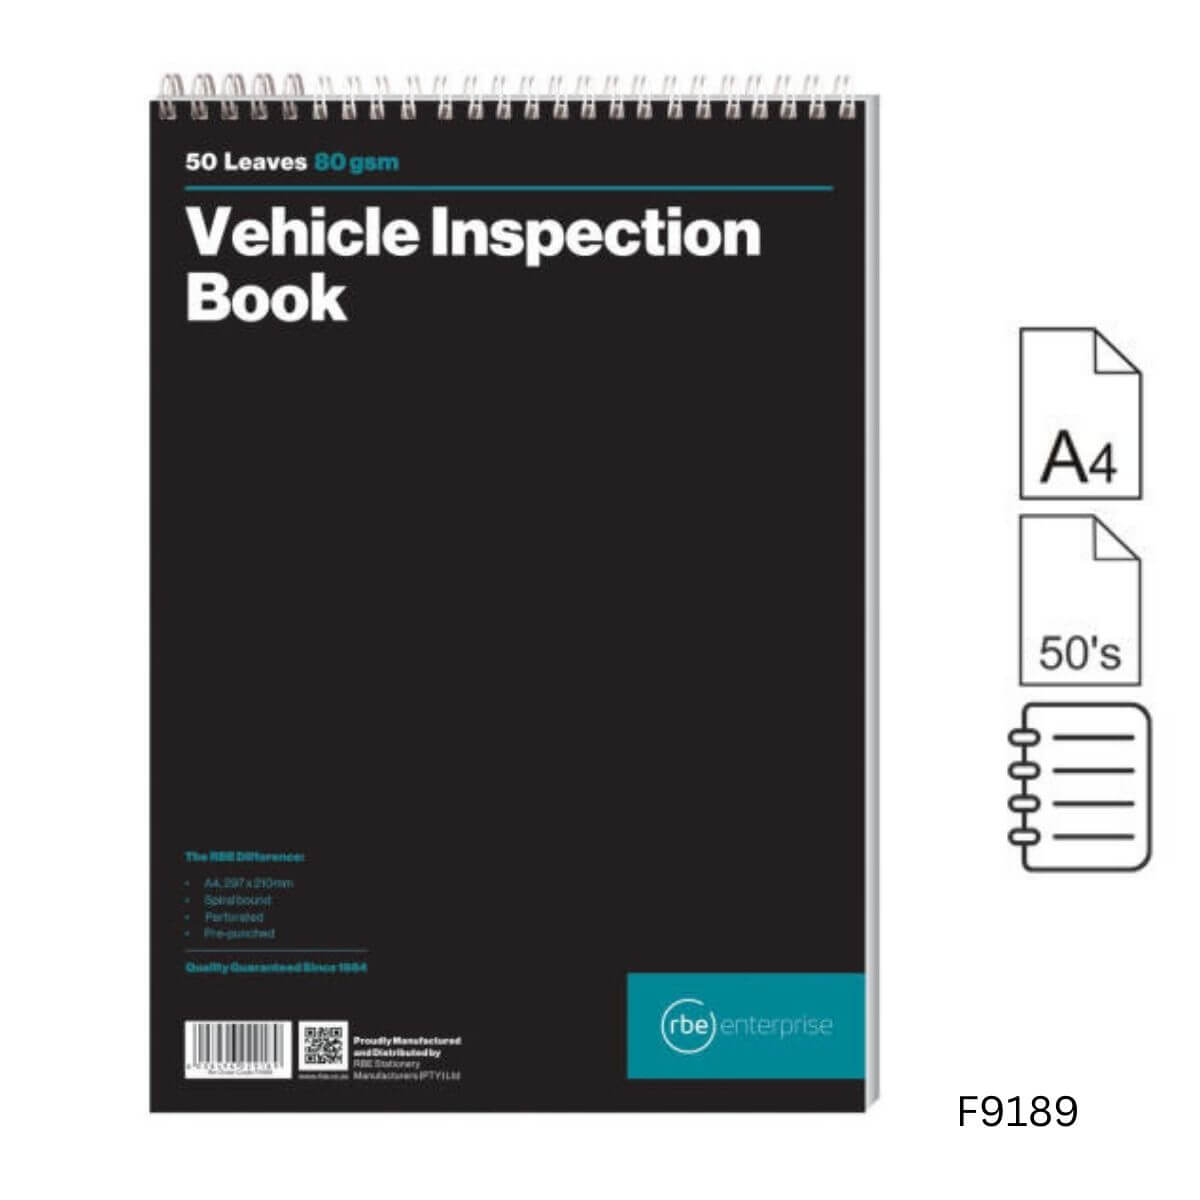 A4 Vehicle Inspection Book